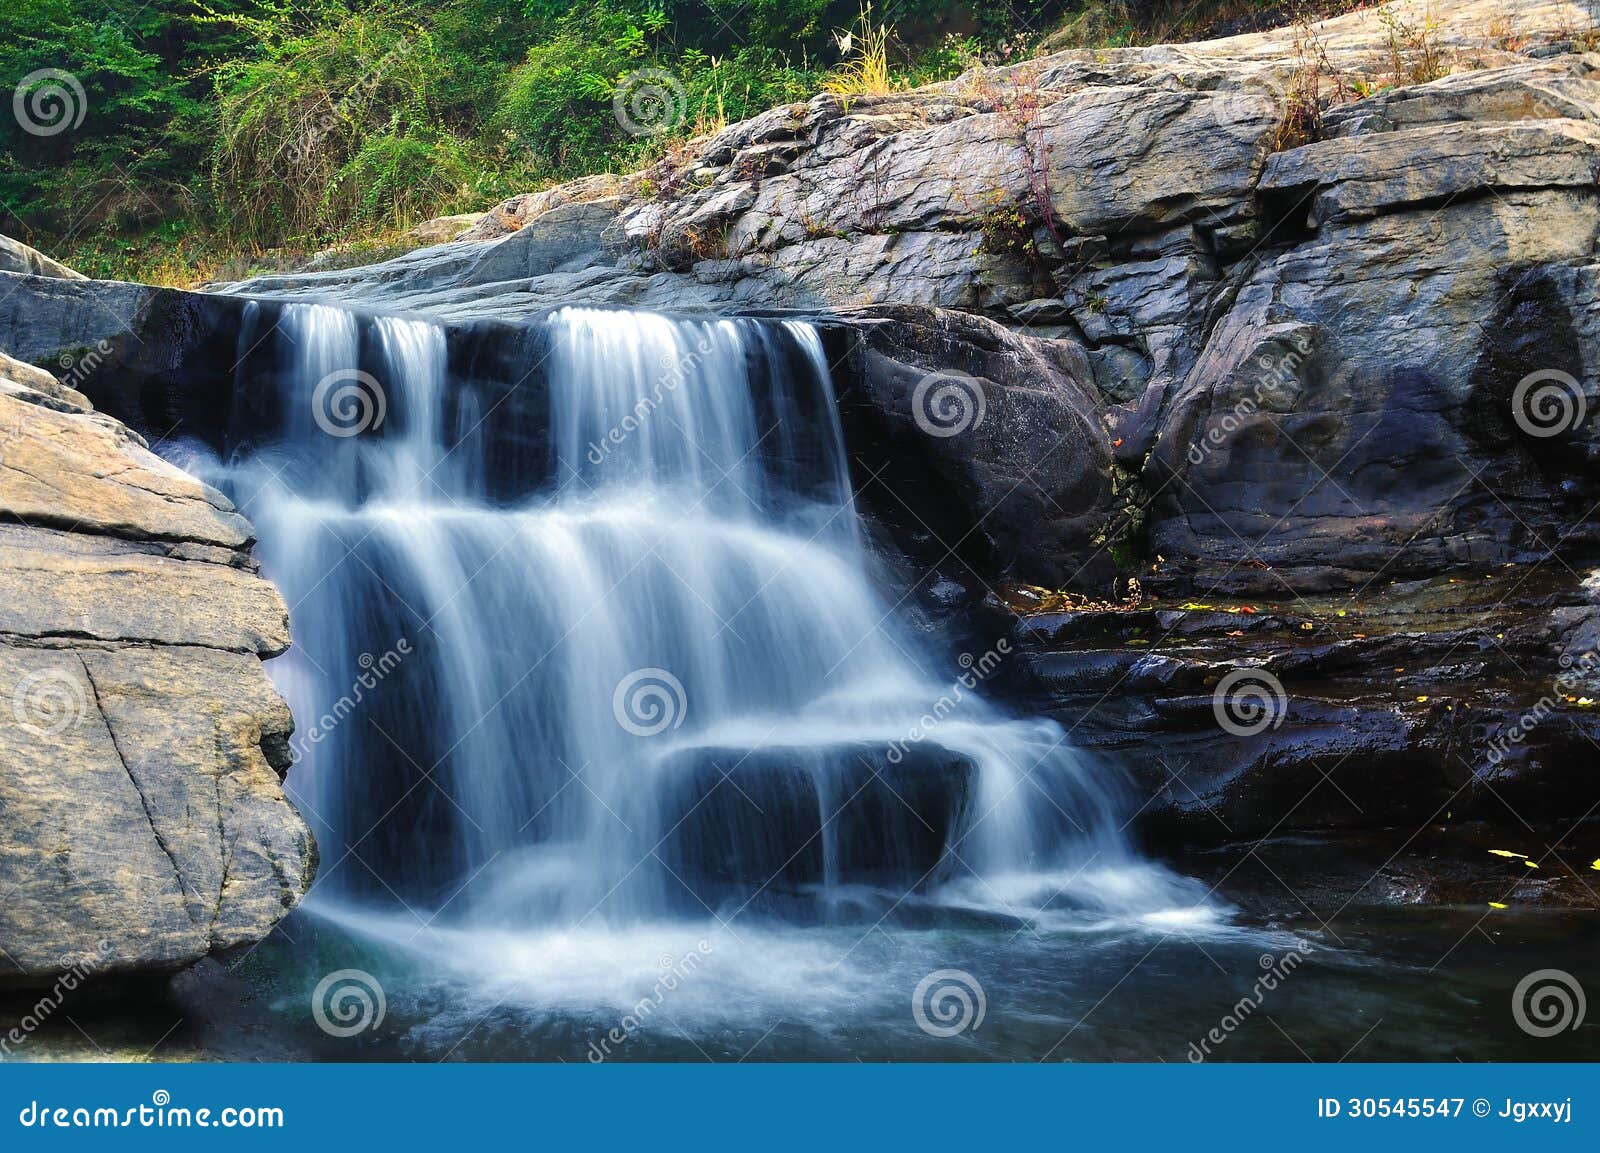 Waterfall stock image. Image of background, disasters ...